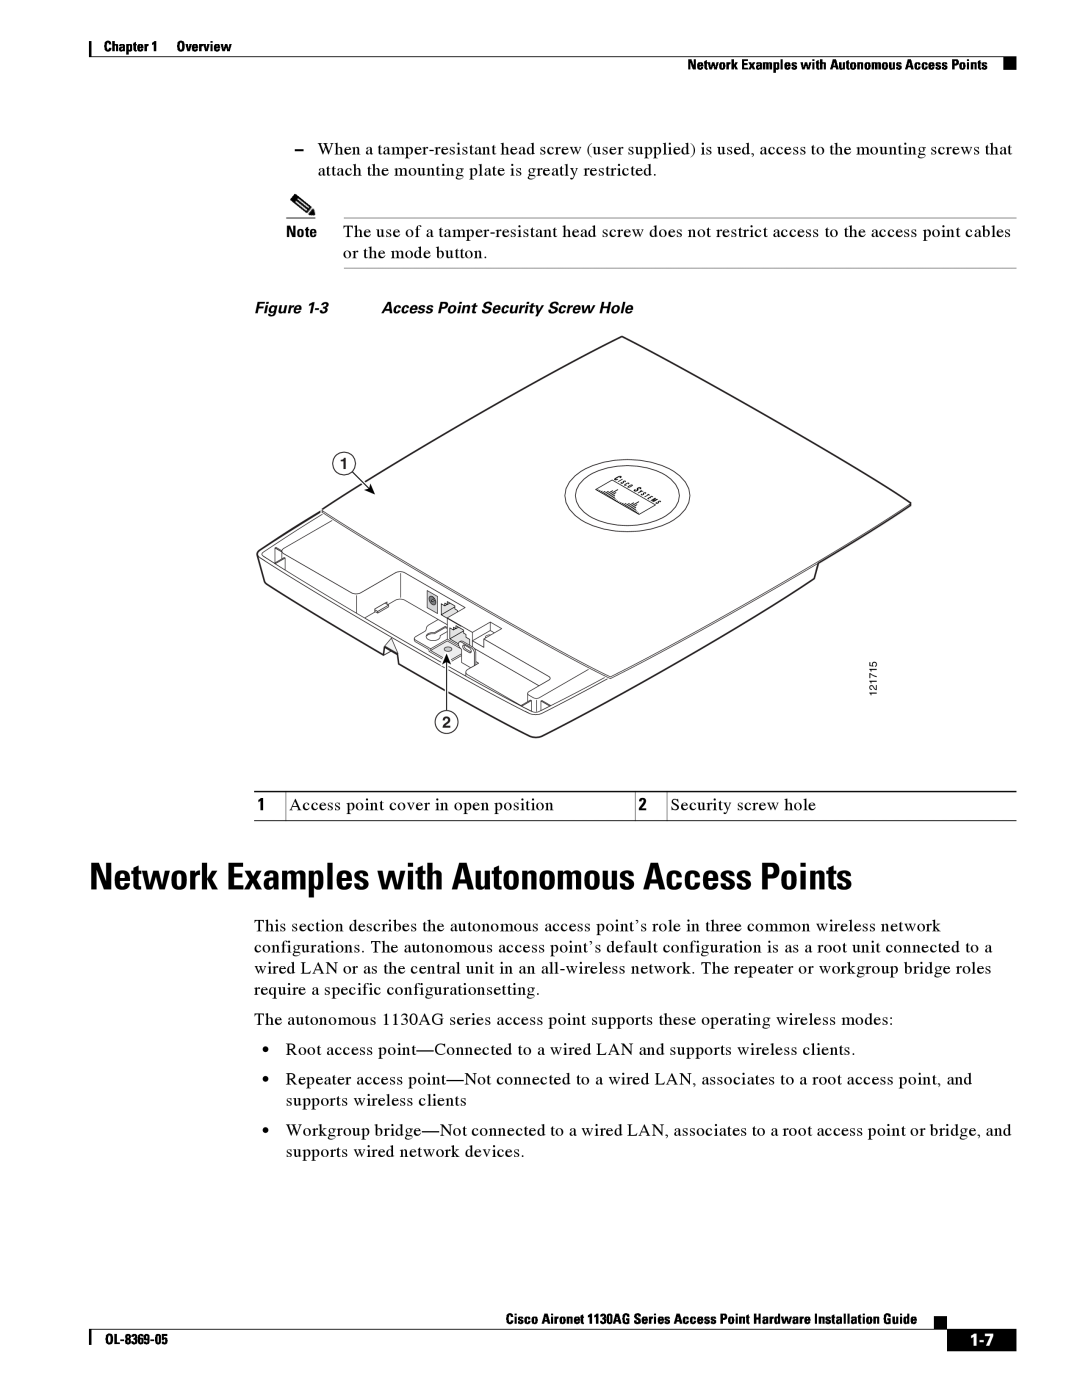 Cisco Systems 1130AG manual Network Examples with Autonomous Access Points, 3 Access Point Security Screw Hole 